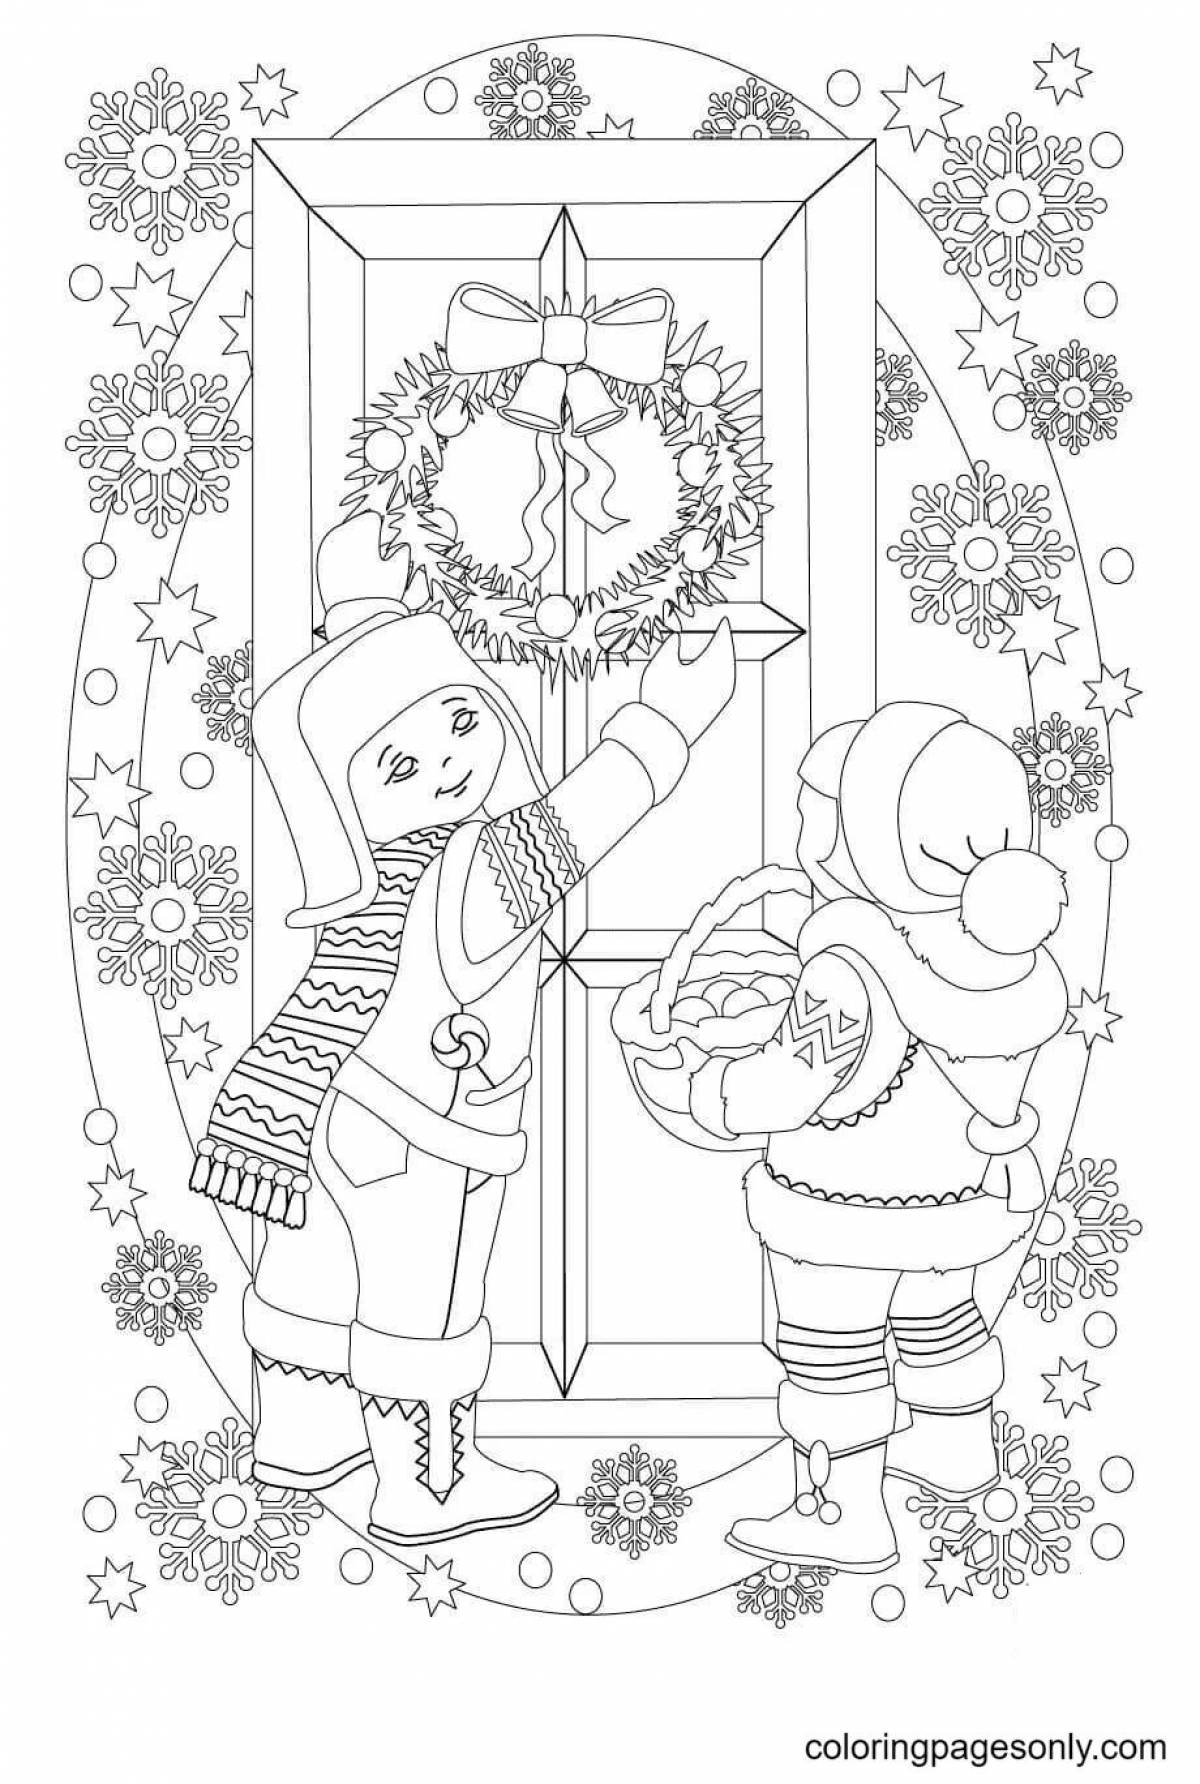 Fancy coloring for christmas eve